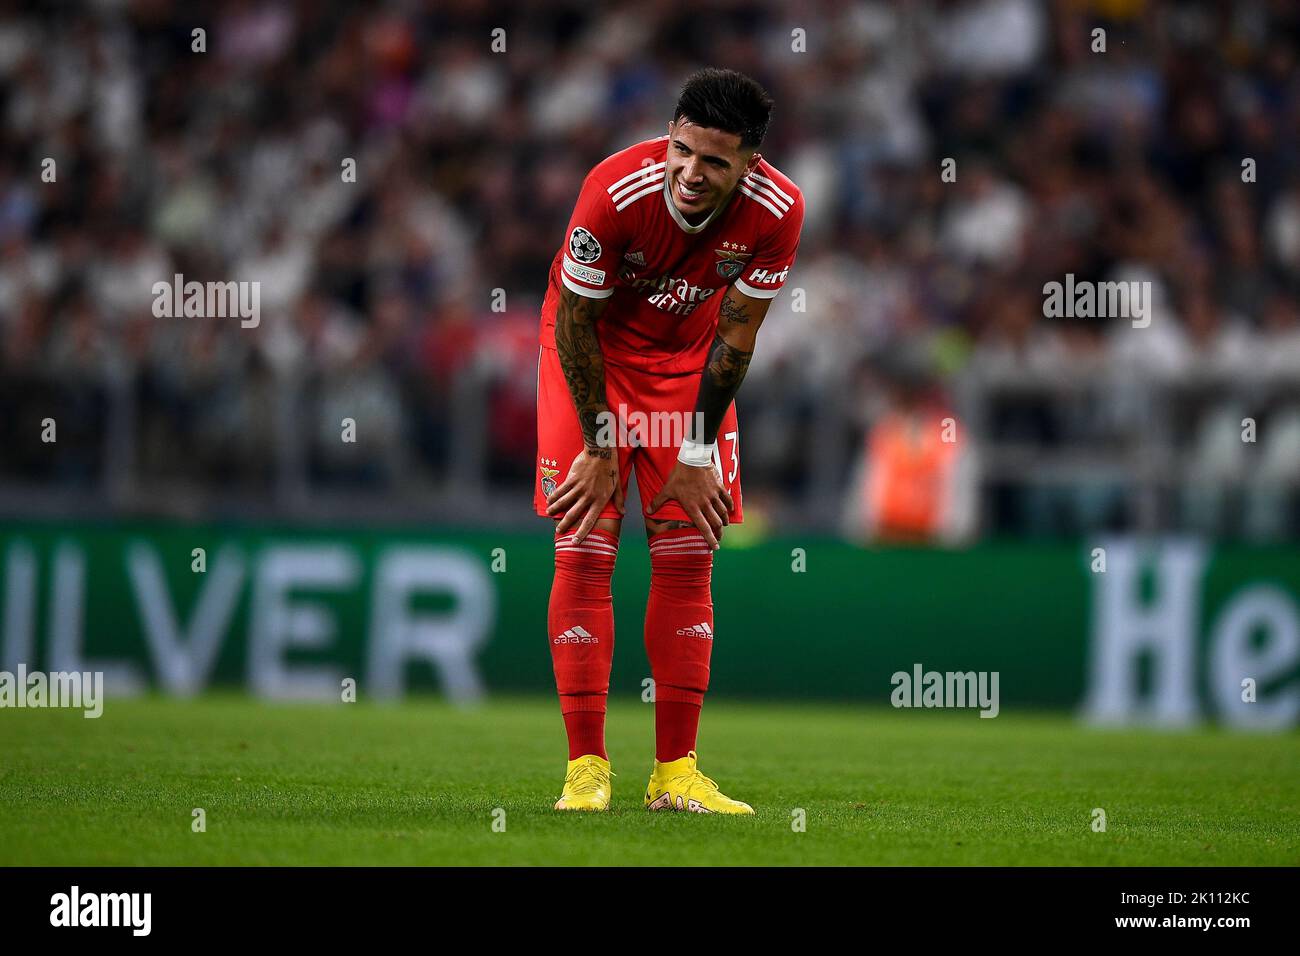 Turin, Italy. 14 September 2022. Enzo Fernandez of SL Benfica looks dejected during the UEFA Champions League football match between Juventus FC and SL Benfica. Credit: Nicolò Campo/Alamy Live News Stock Photo